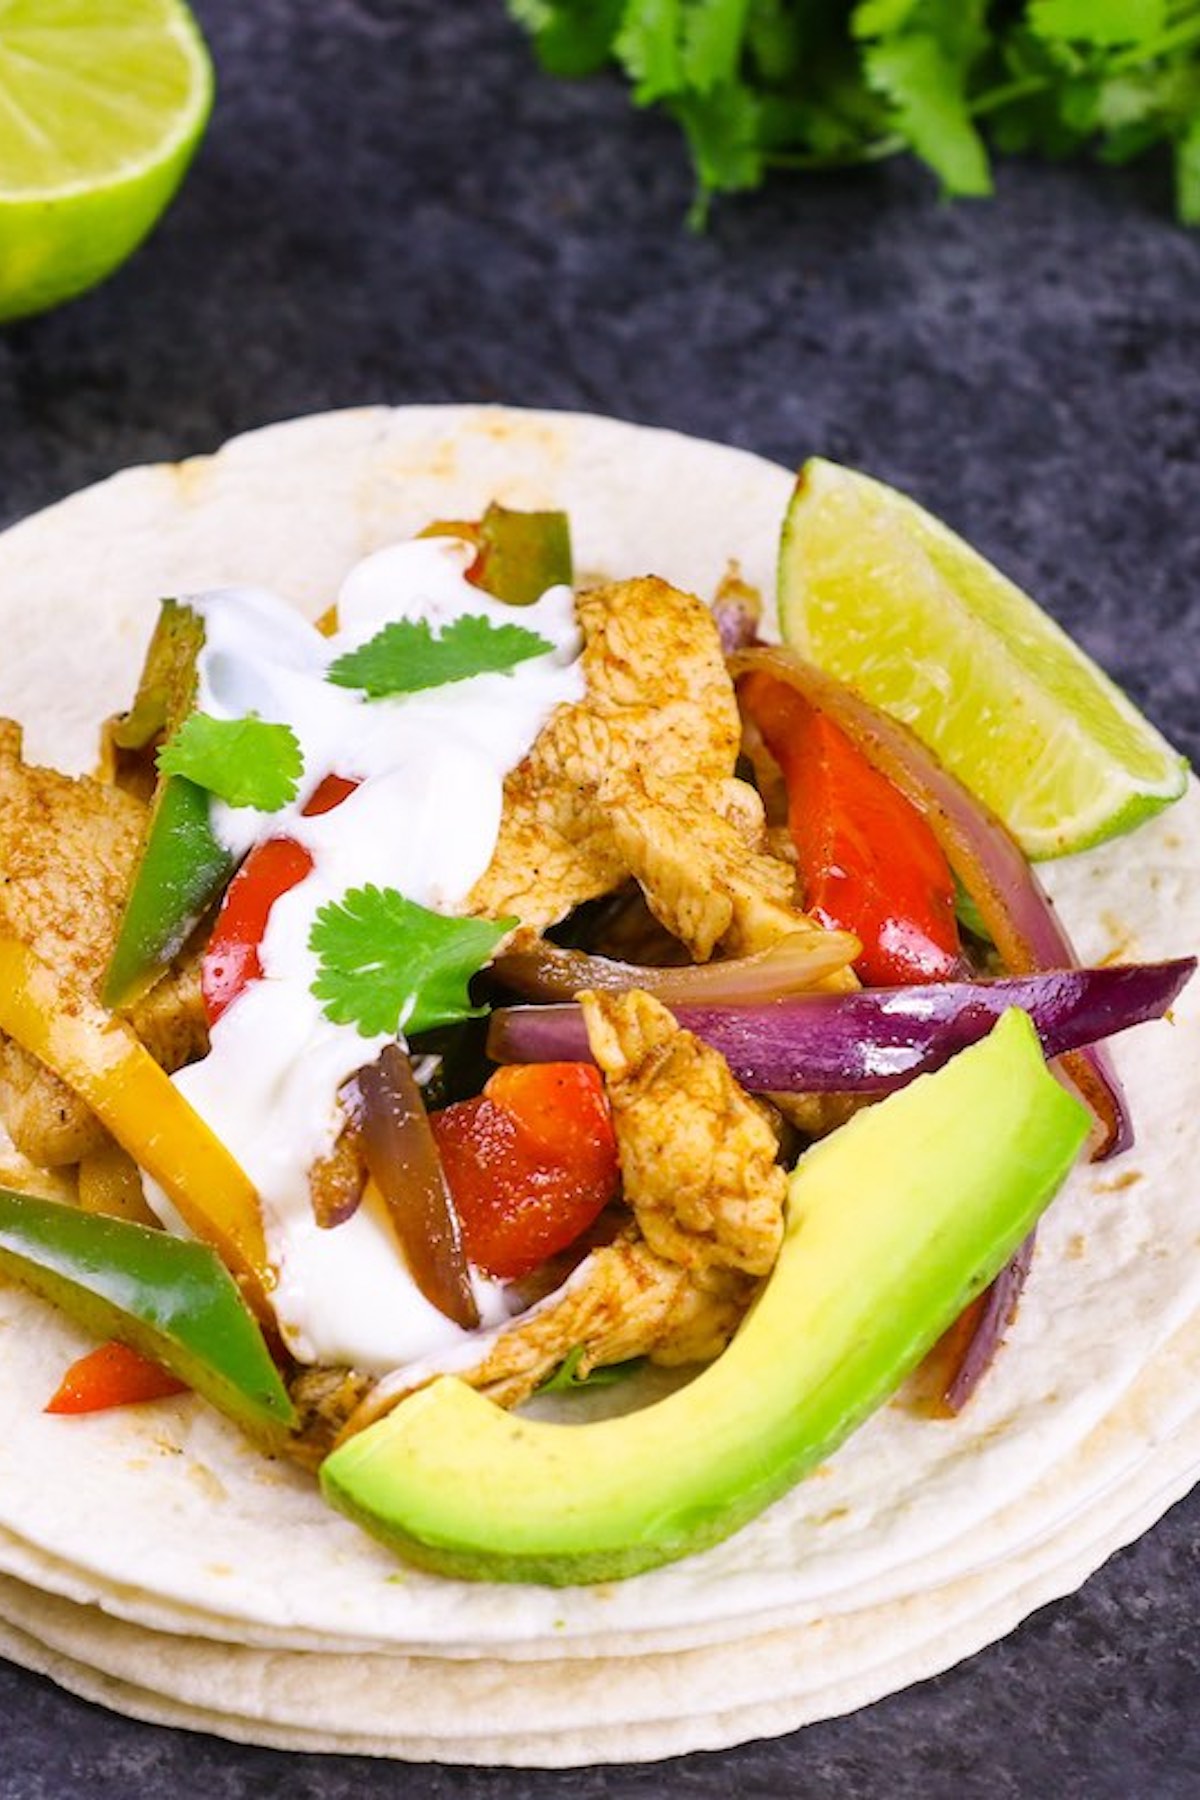 Fajitas are a versatile dish that can easily be customized to suit your taste. You can make them with different types of meat, fish, or seafood, or opt for a healthy blend of veggies instead. We’ve collected 11 of our favorite Fajita Toppings. Give them a try the next time you’re making fajitas for dinner!